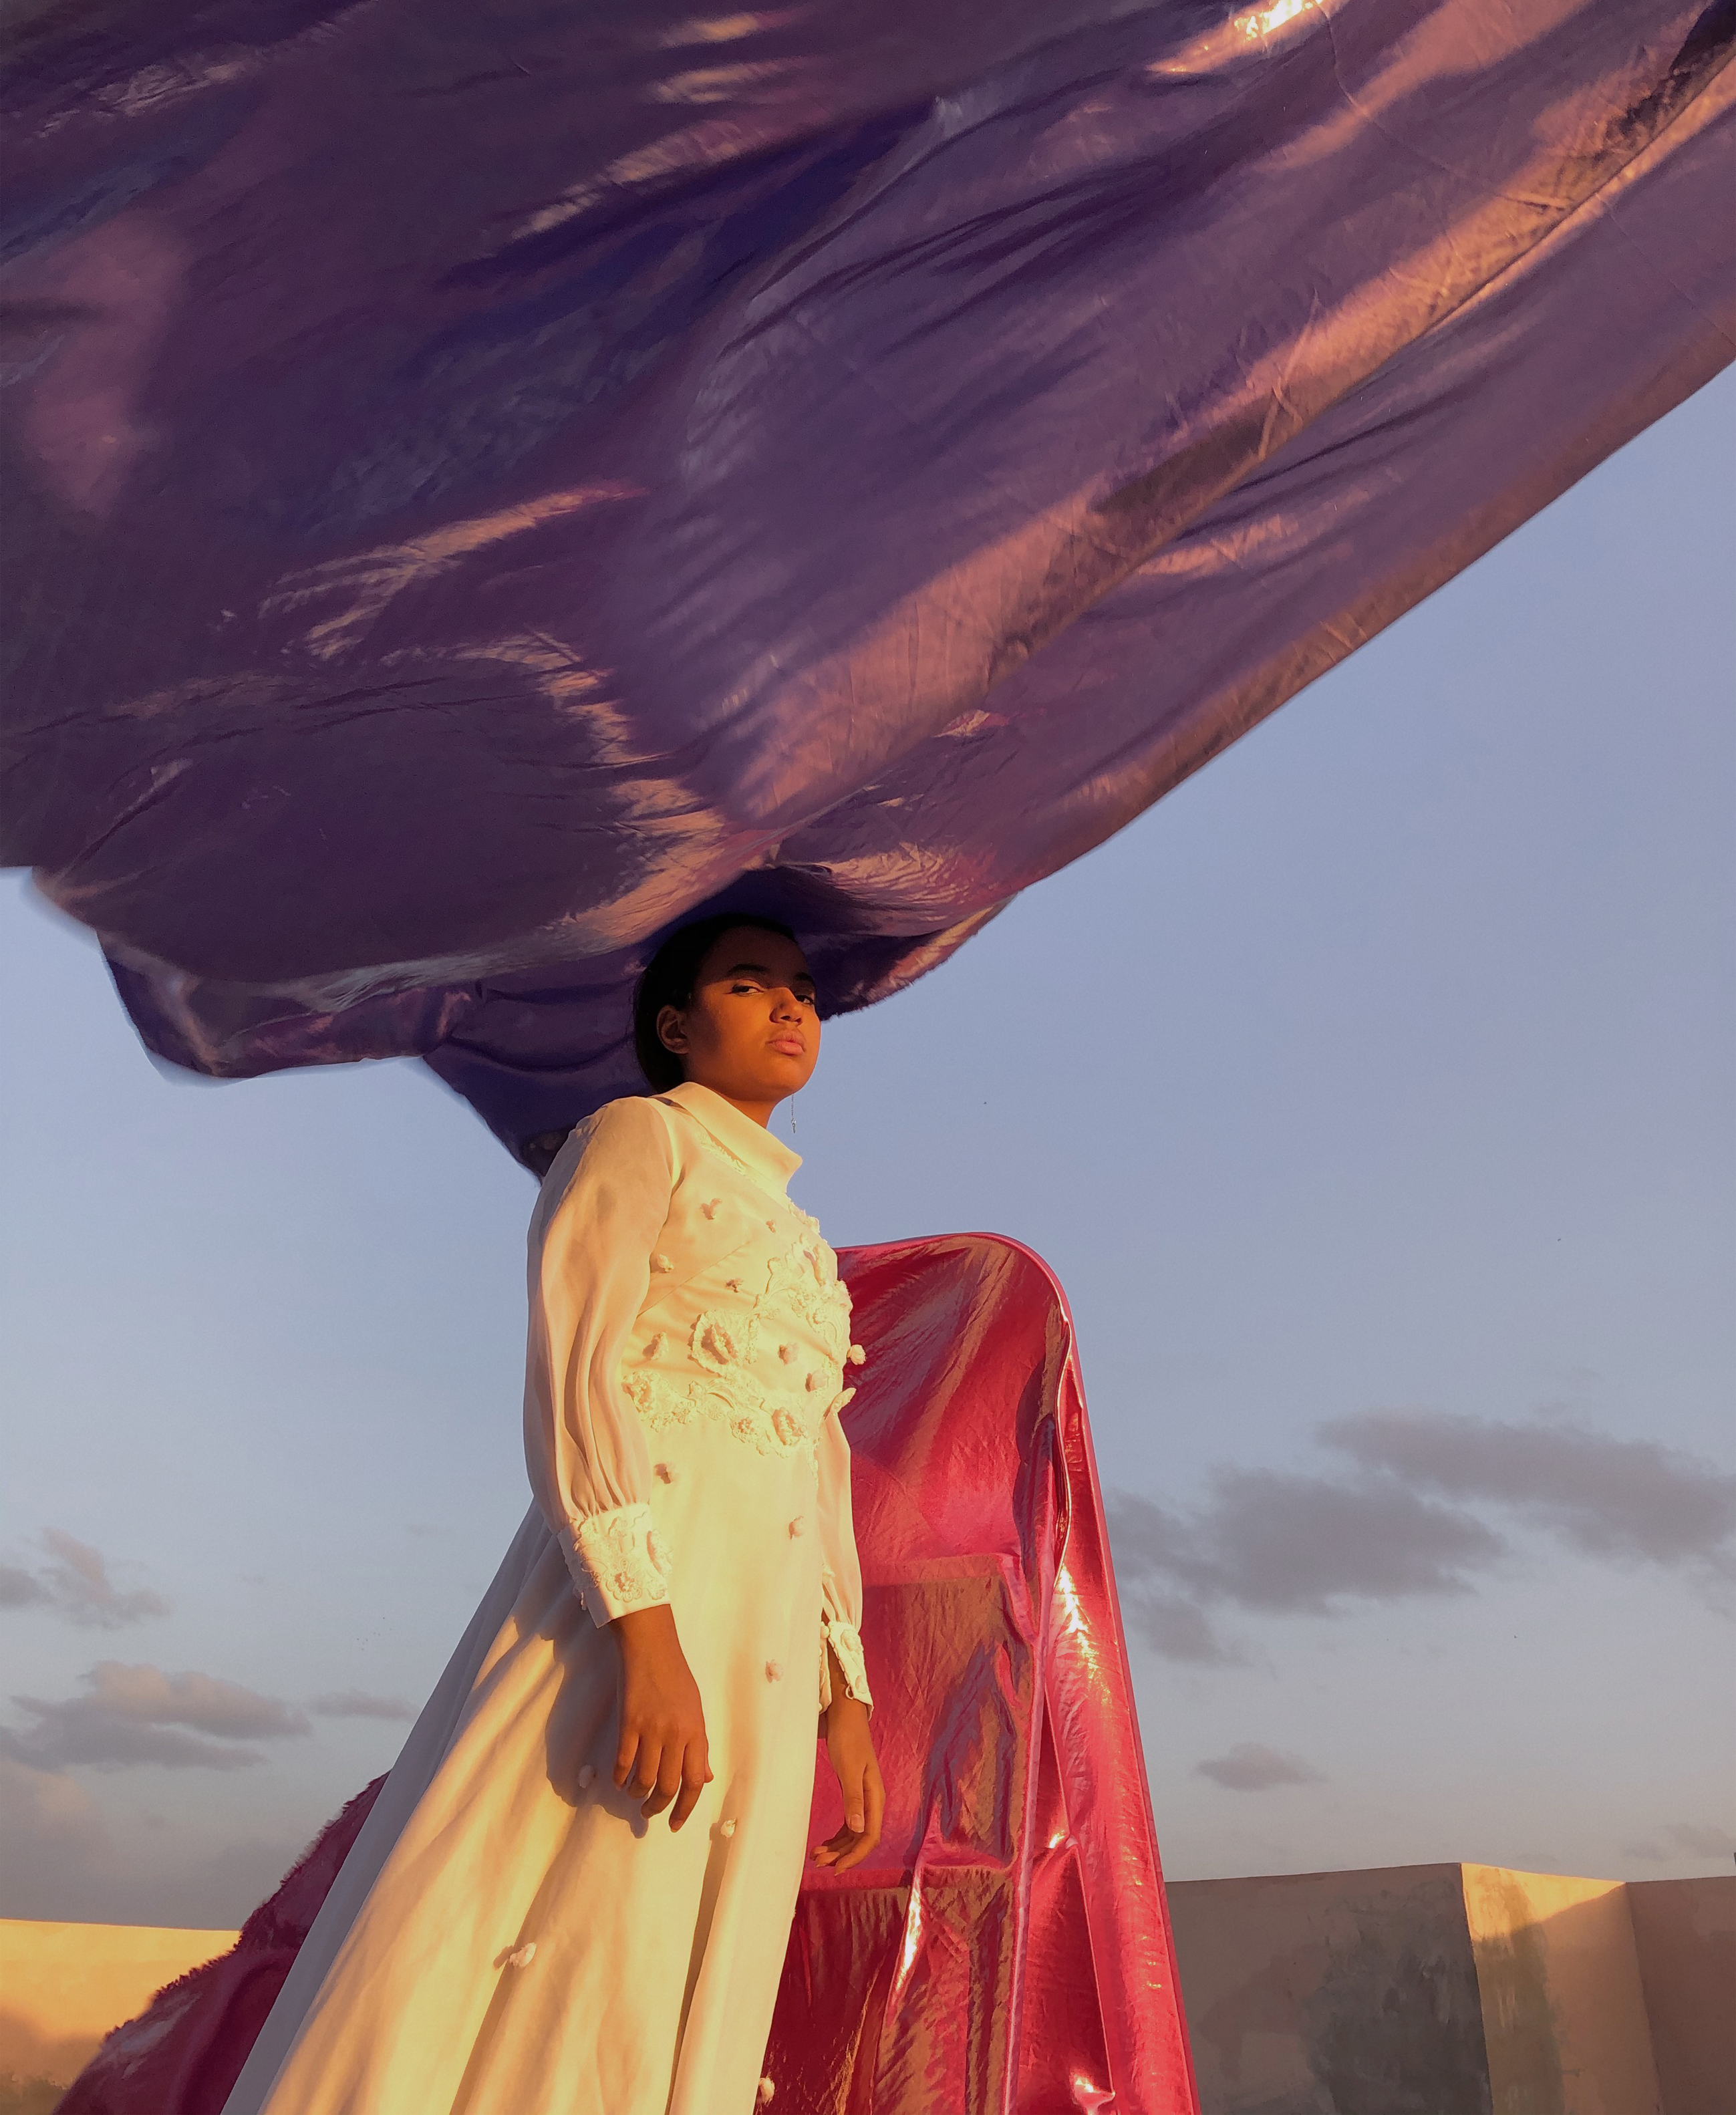 An individual in a white sleeved gown against the setting sky with neon metallic pink and purple inflatables behind them and resting on their head.